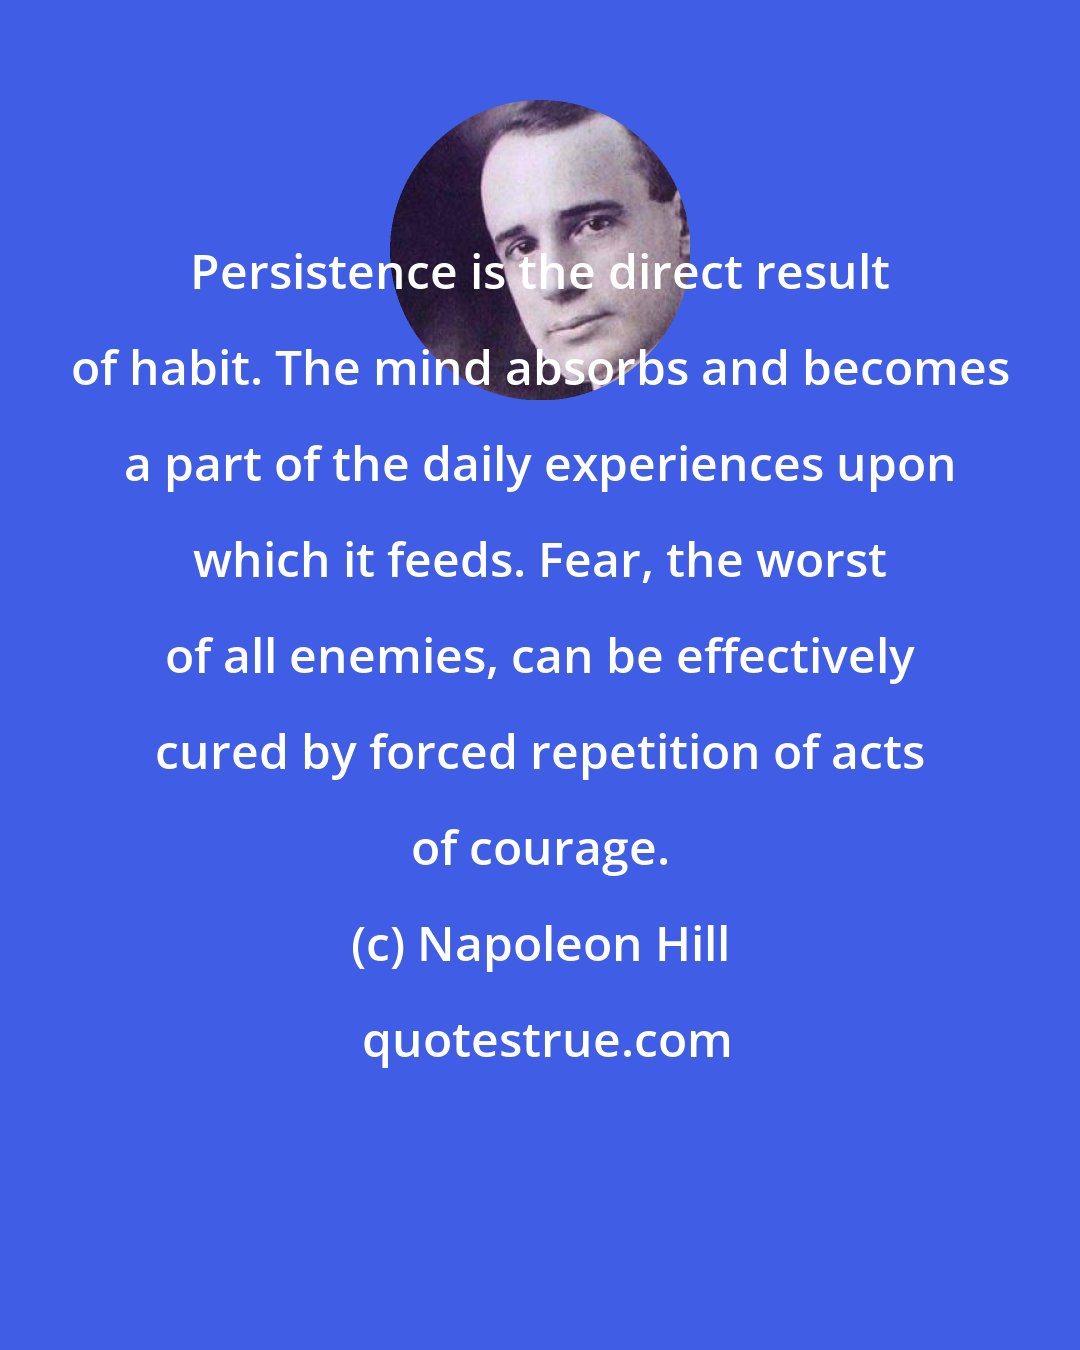 Napoleon Hill: Persistence is the direct result of habit. The mind absorbs and becomes a part of the daily experiences upon which it feeds. Fear, the worst of all enemies, can be effectively cured by forced repetition of acts of courage.